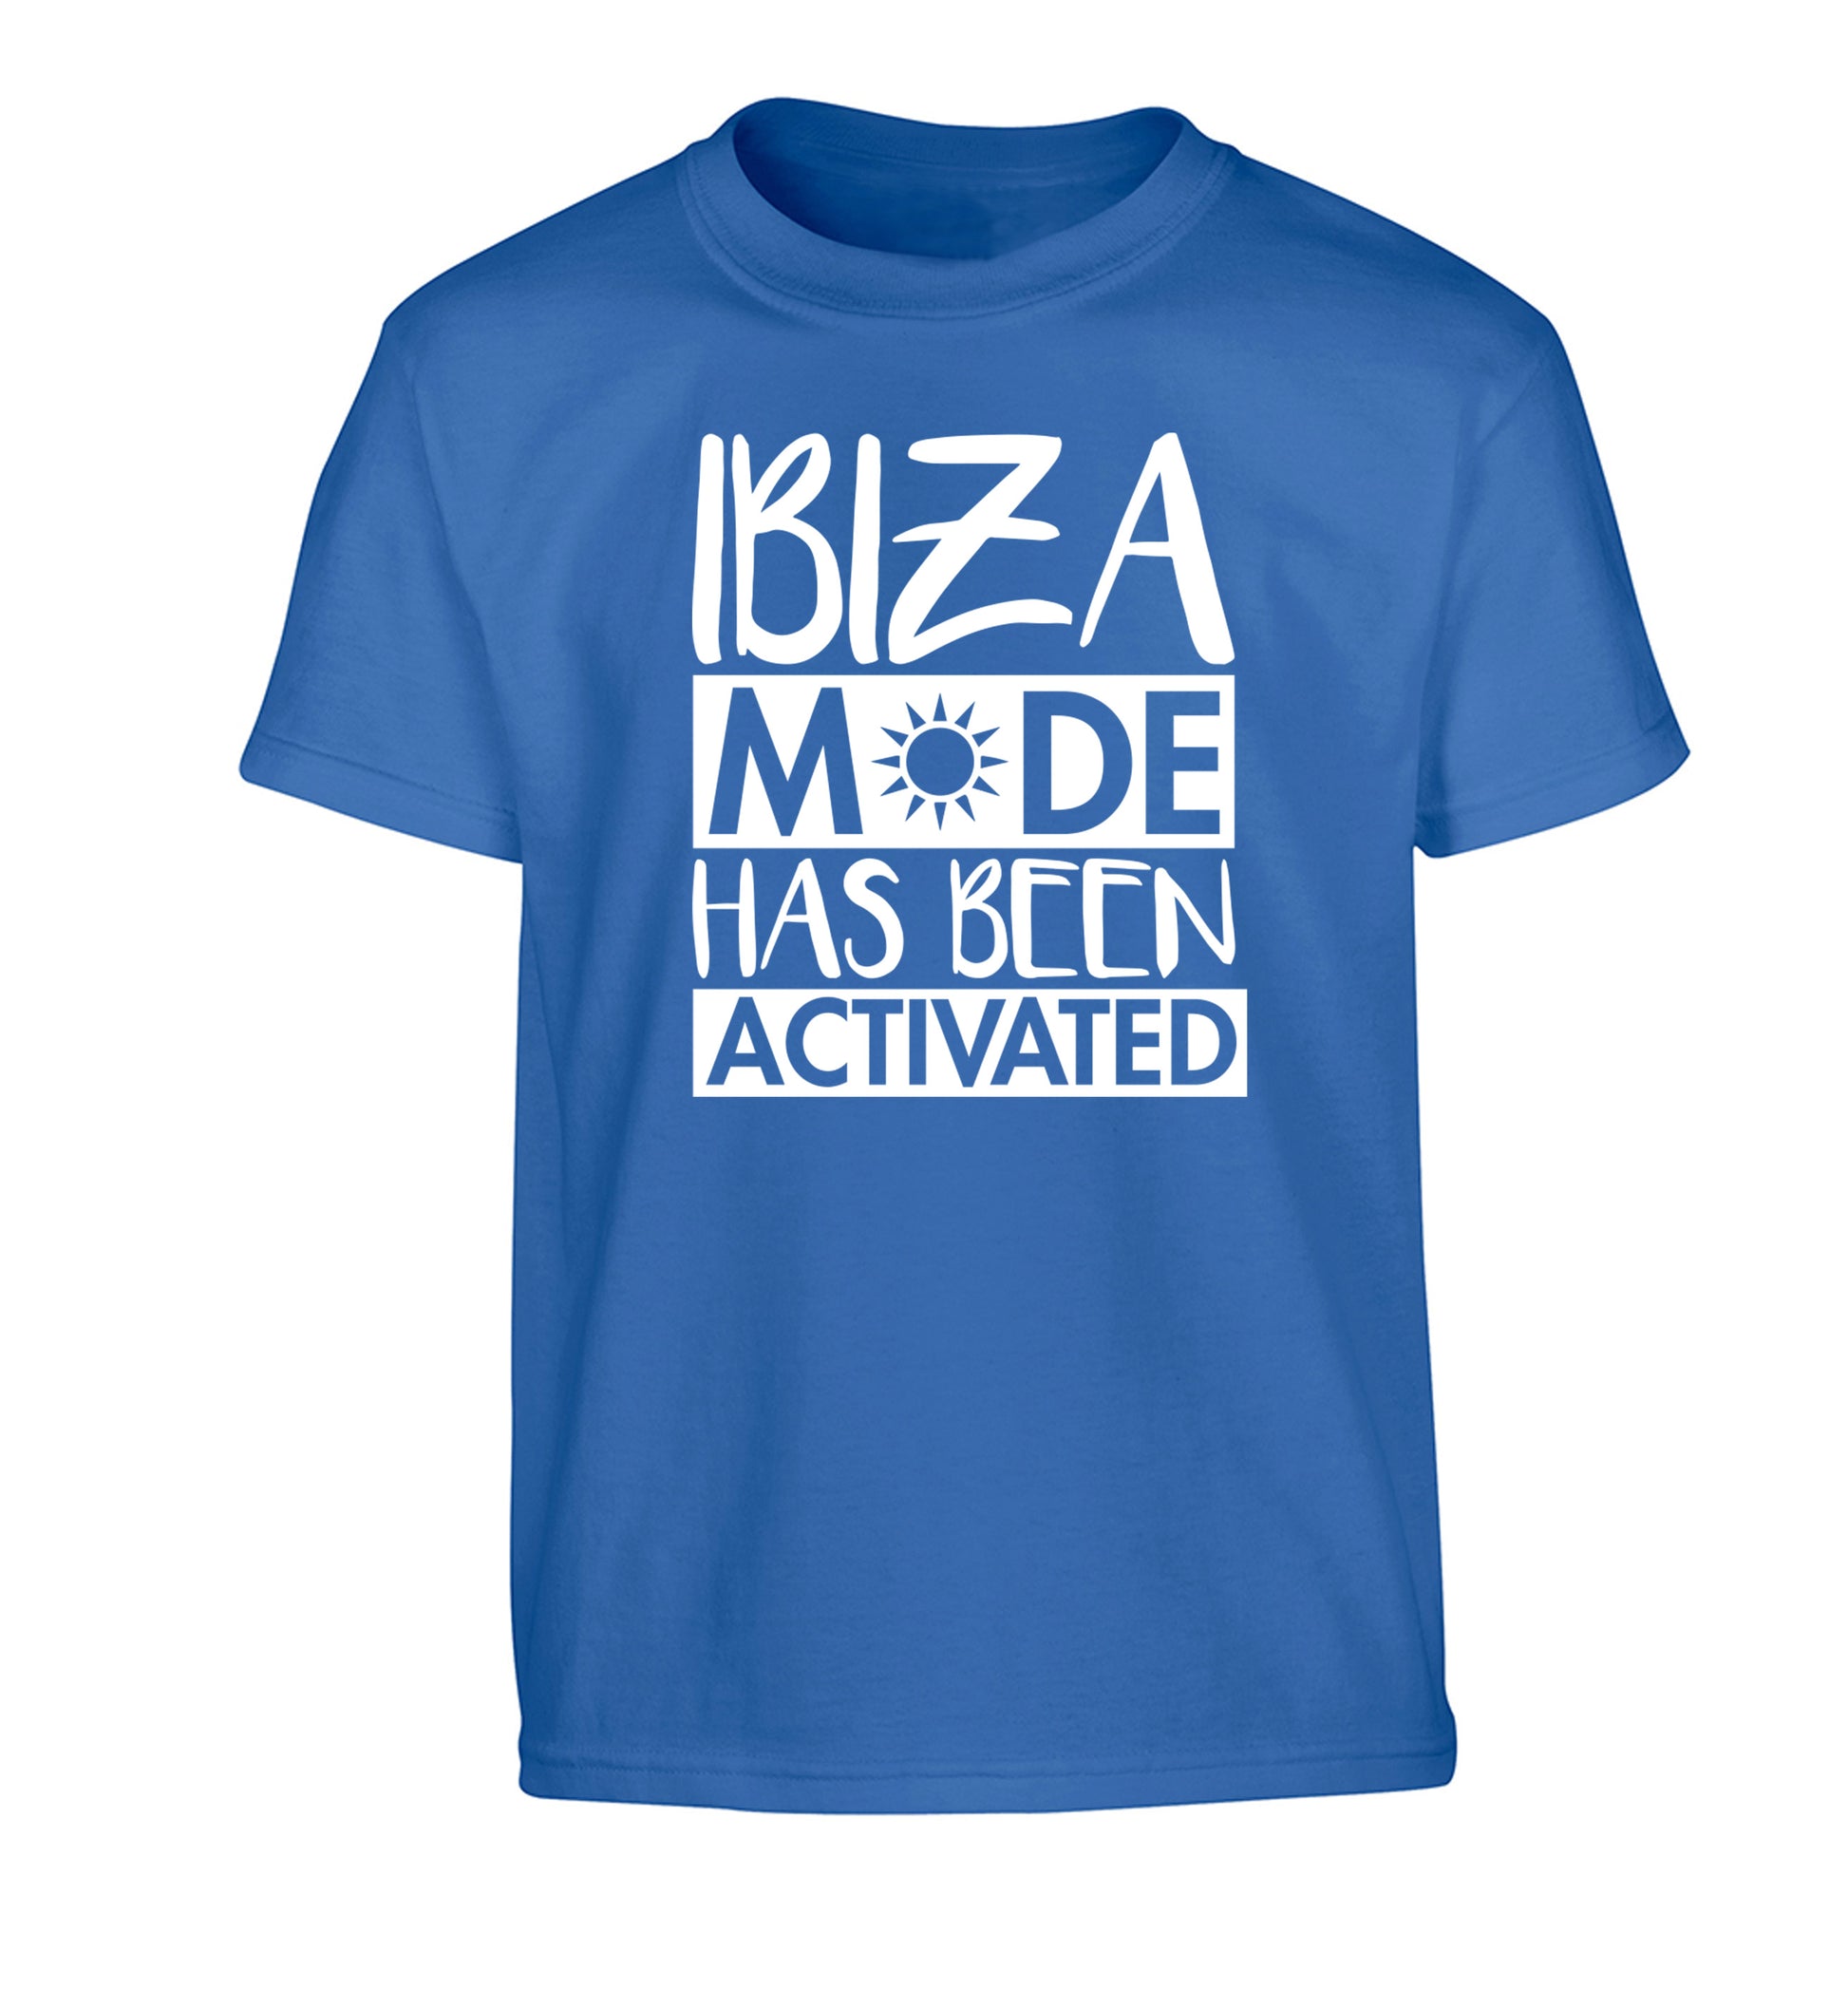 Ibiza mode has been activated Children's blue Tshirt 12-13 Years